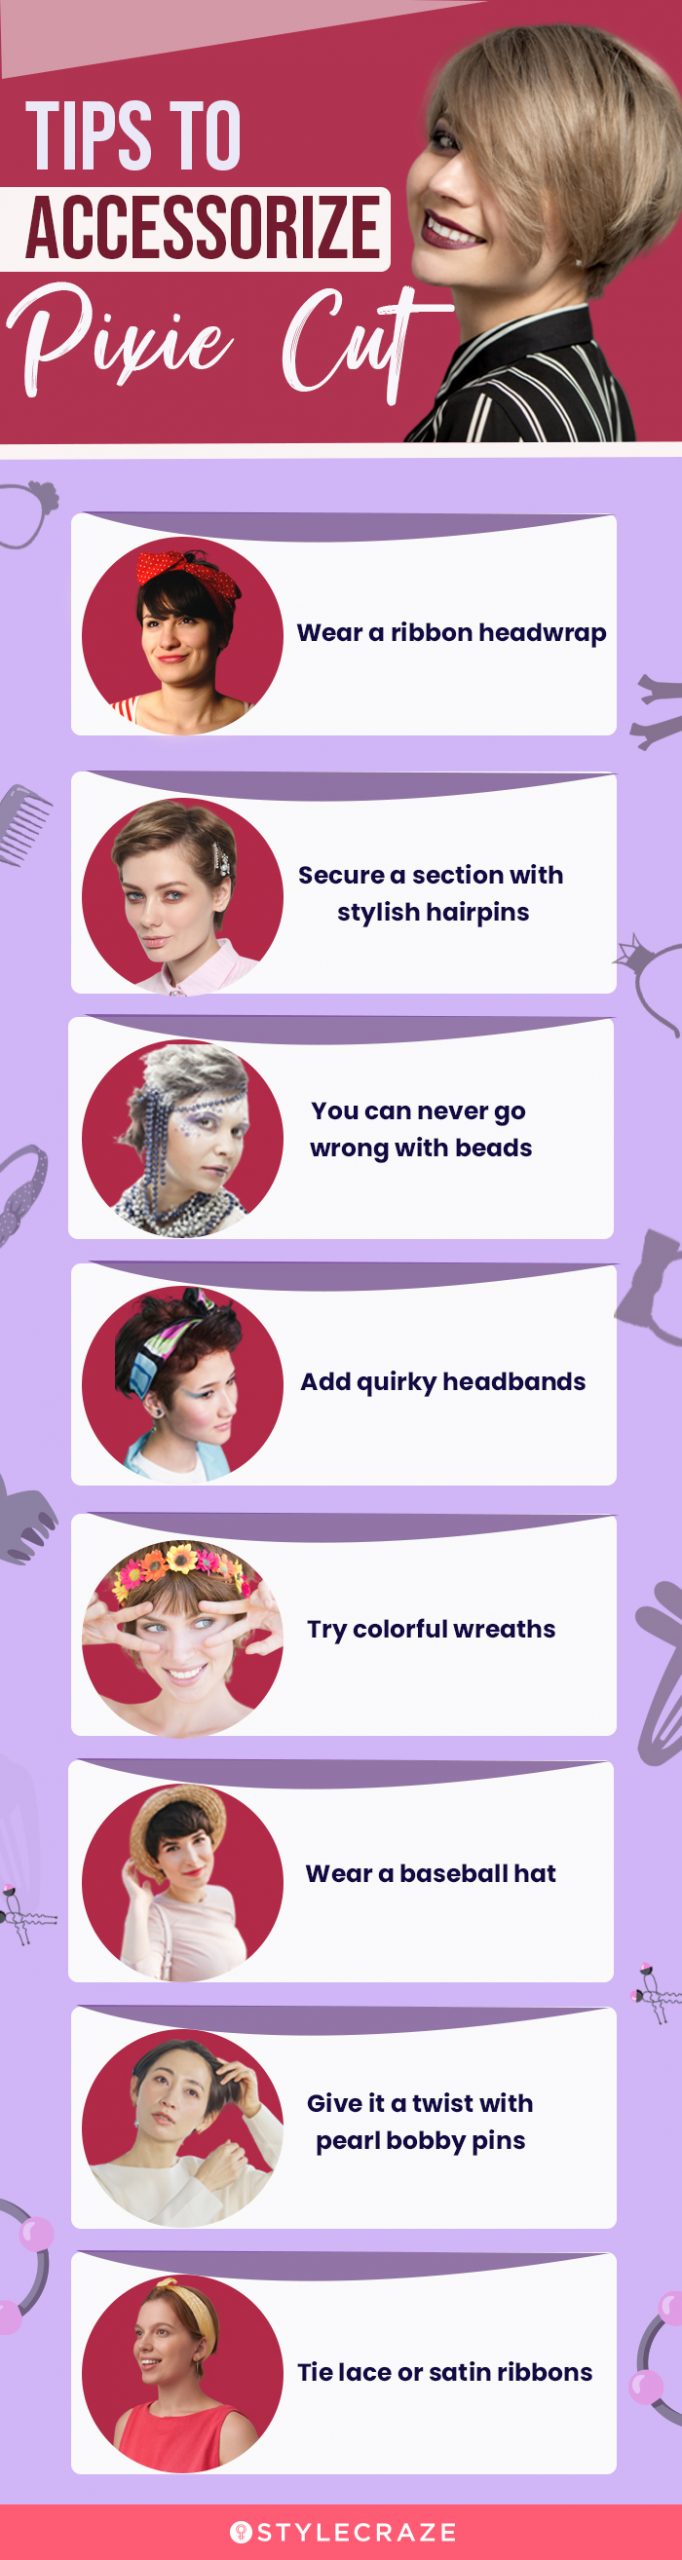 tips to accessorize pixie cut [infographic]